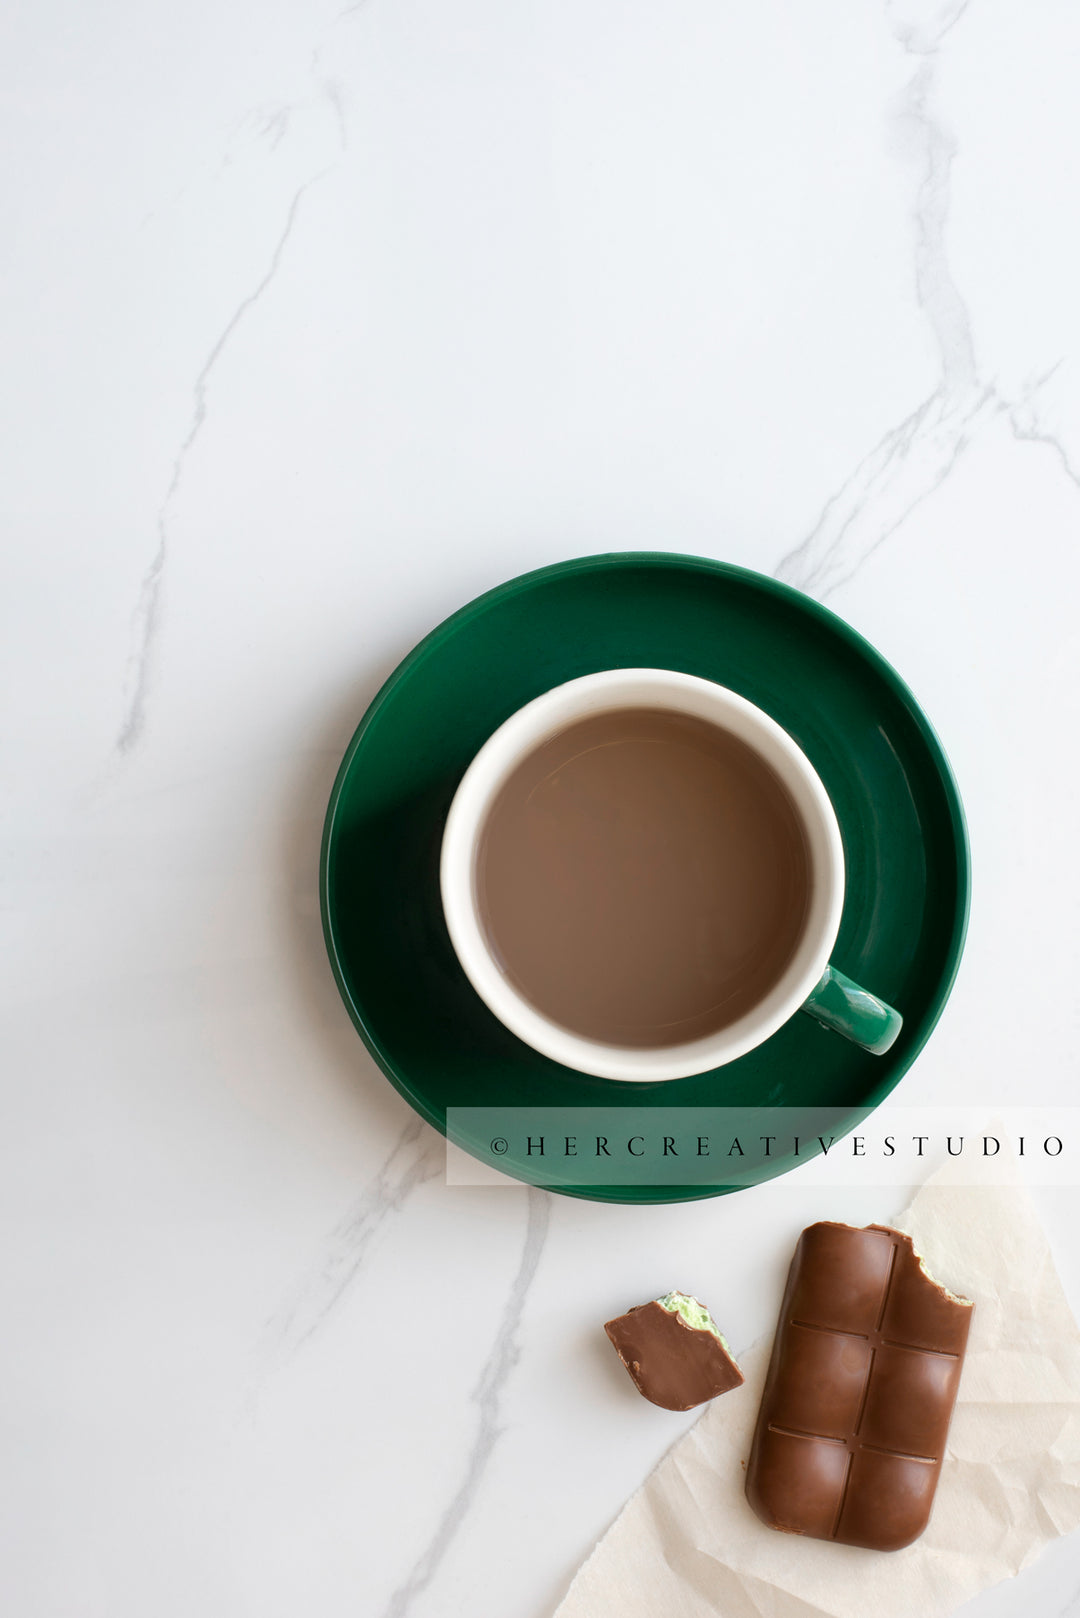 Coffee & Chocolate. Styled Stock Image